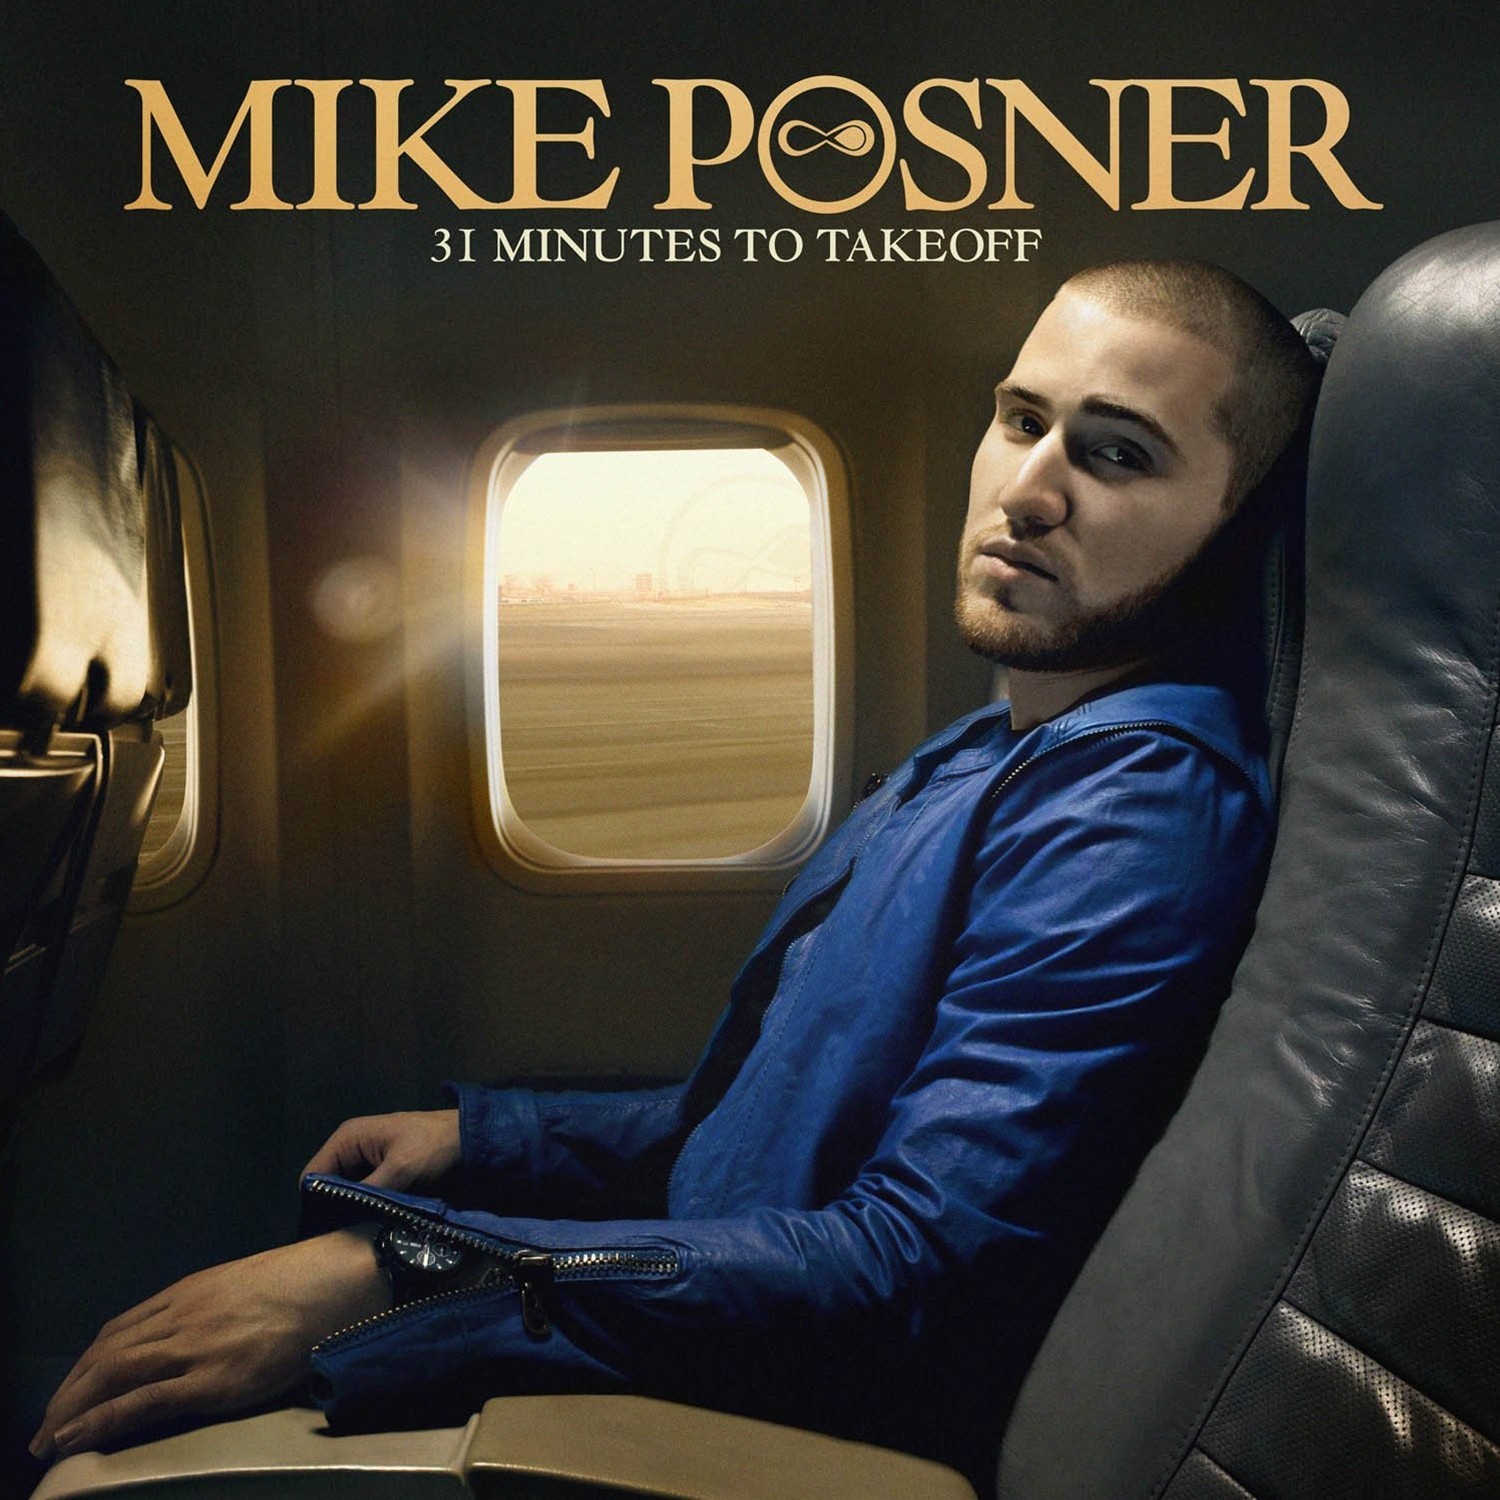 Mike Posner “31 Minutes to Takeoff” Preview [Leak]